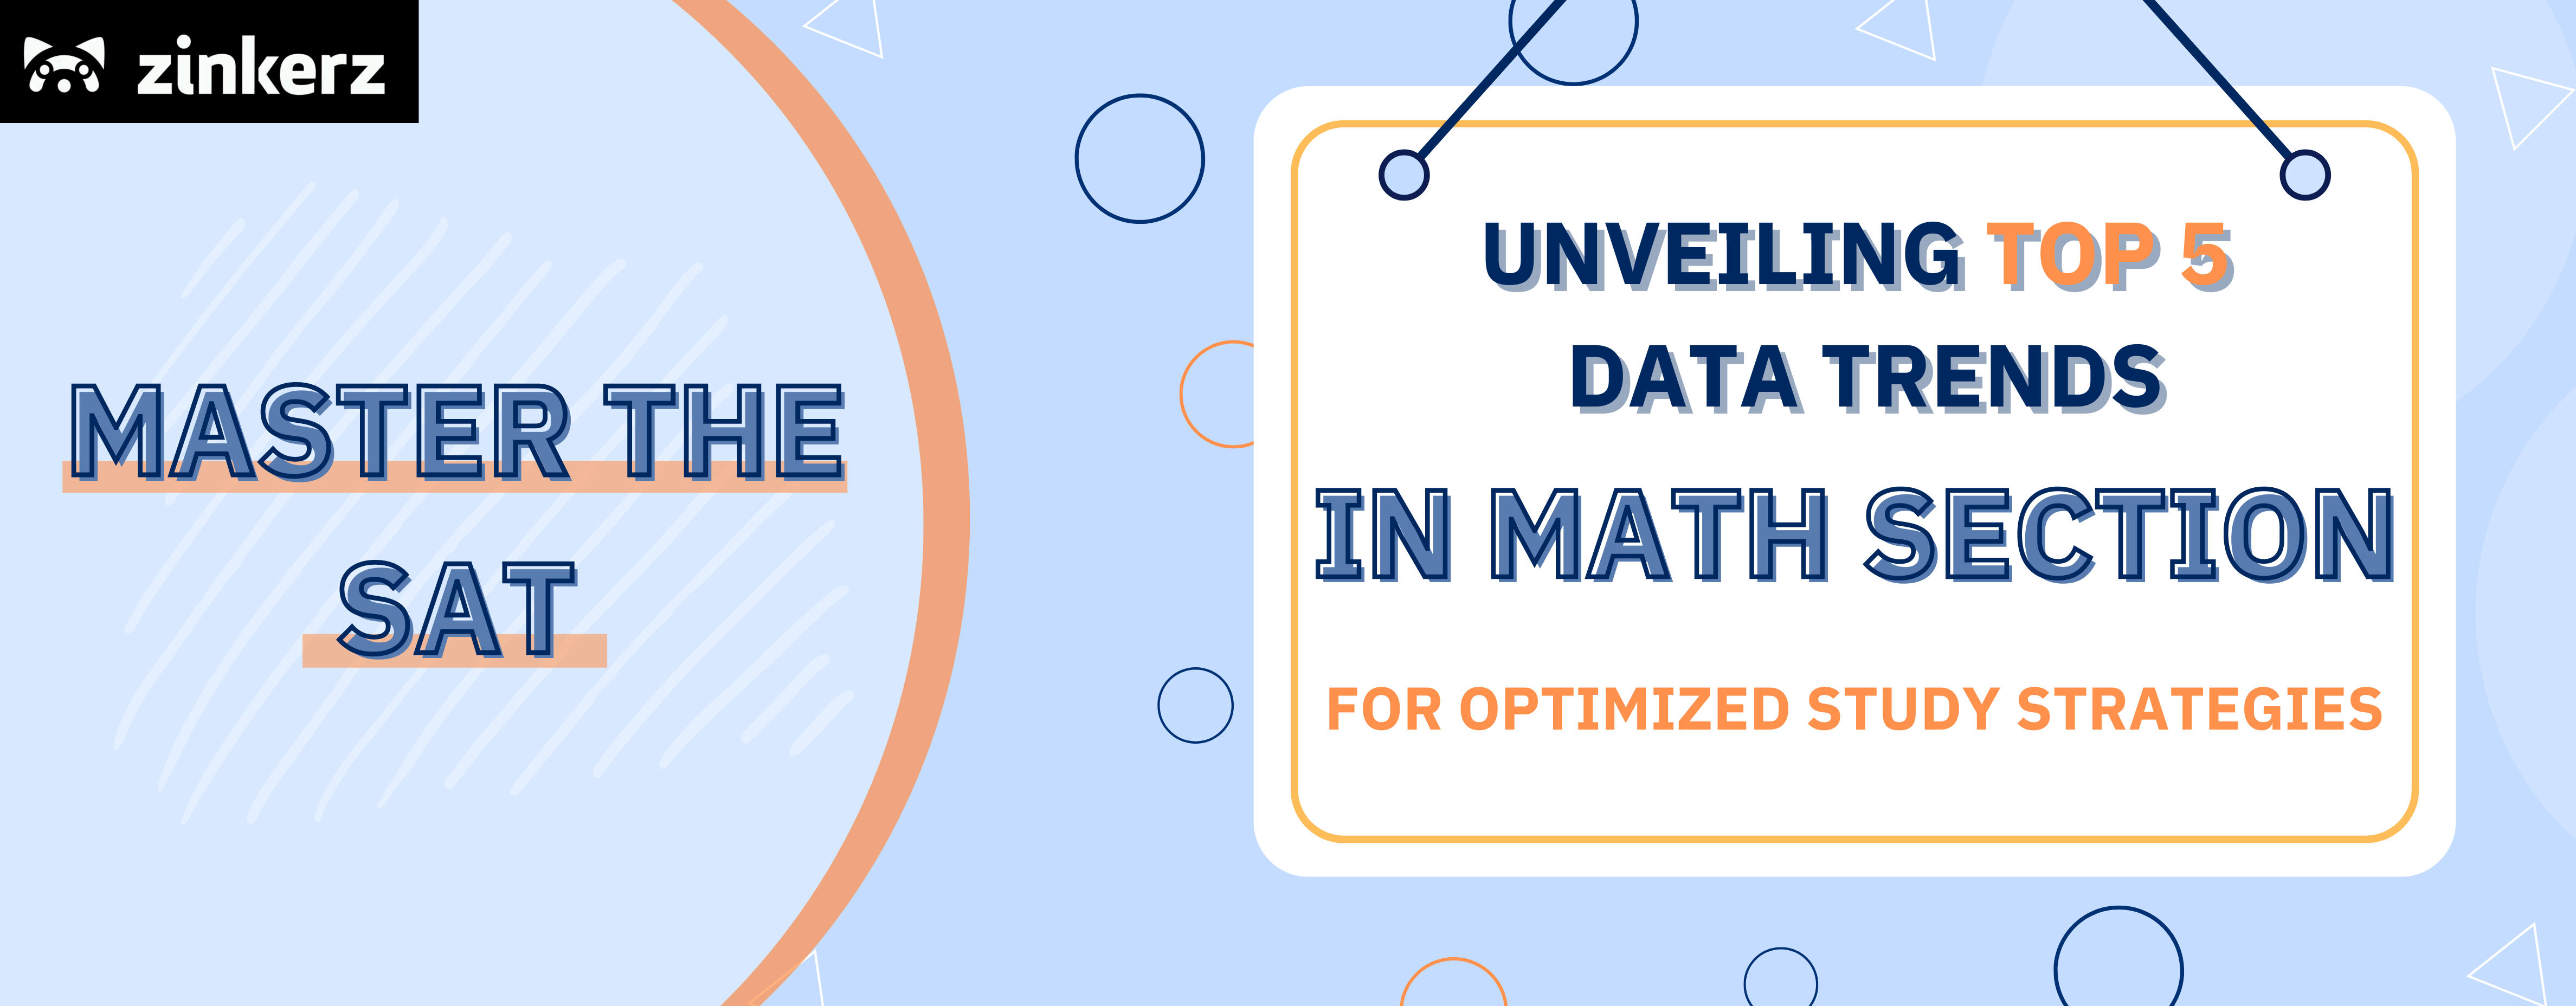 Master the SAT: Unveiling Top 5 Data Trends in Math Section for Optimized Study Strategies